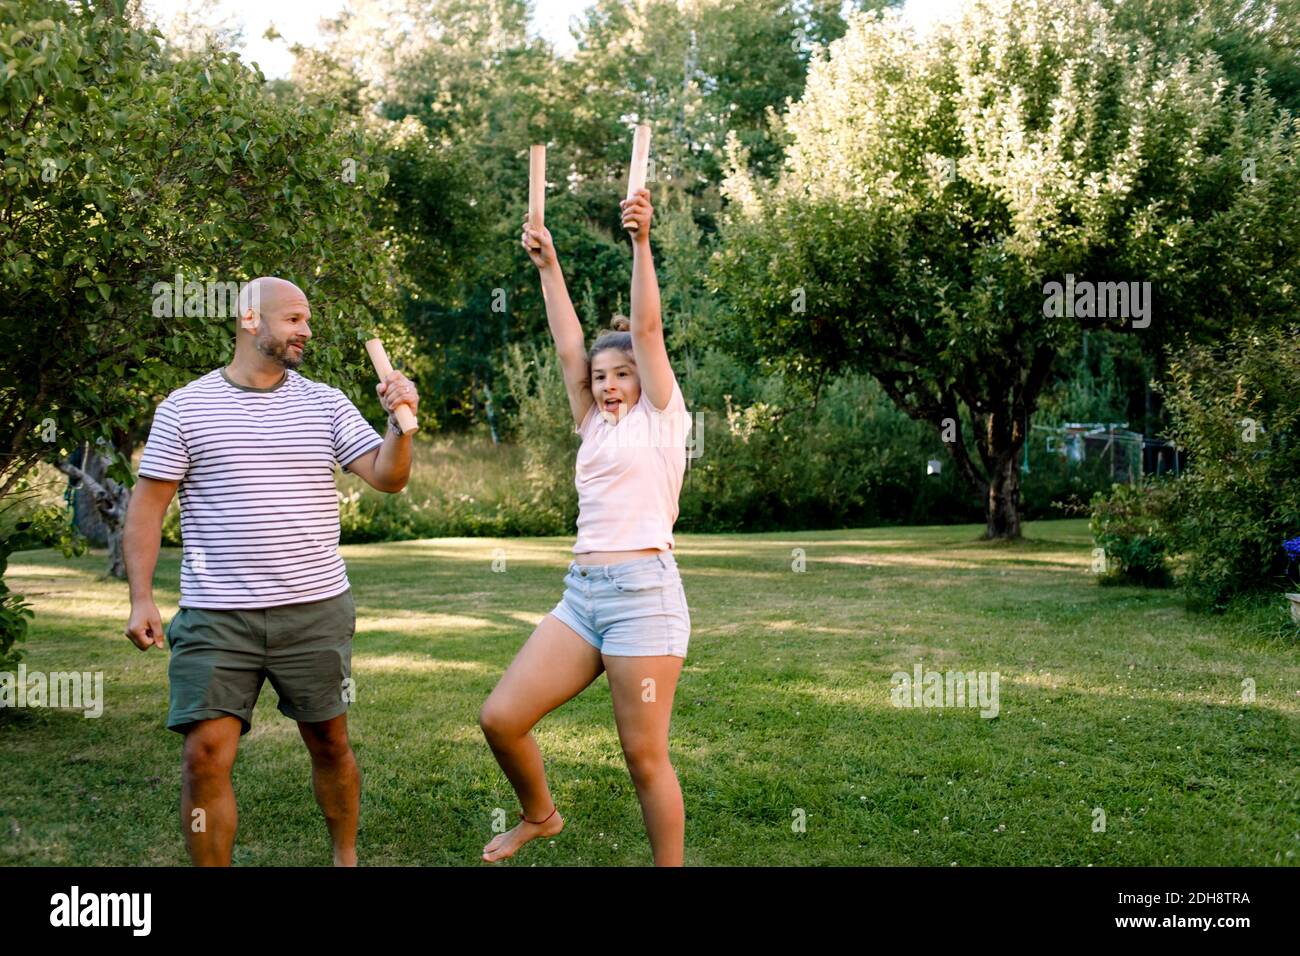 Father looking at daughter with hand raised while playing molkky in yard Stock Photo